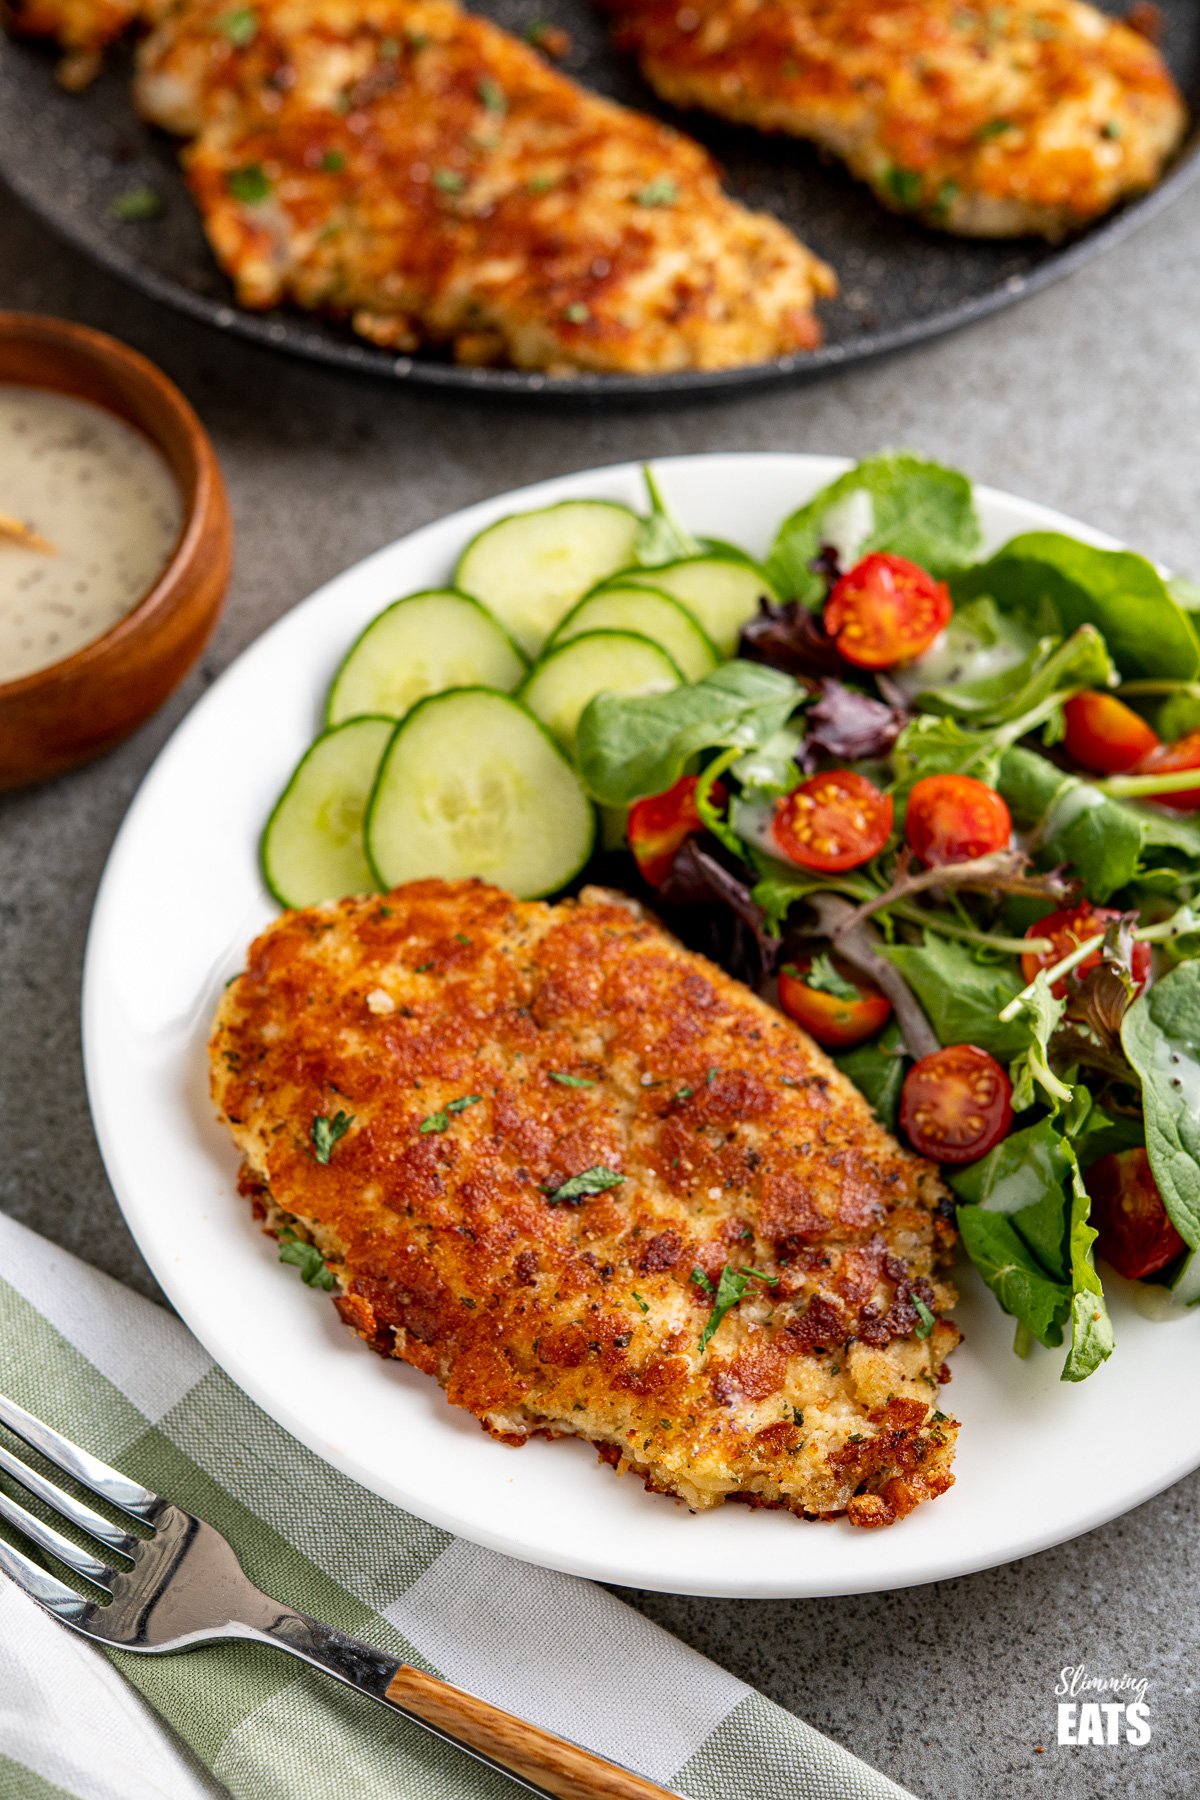 Golden Parmesan Crusted Chicken cutlet on white plate with baby greens, tomatoes and cucumber, fork placed to the side and skillet bowl of dressing background